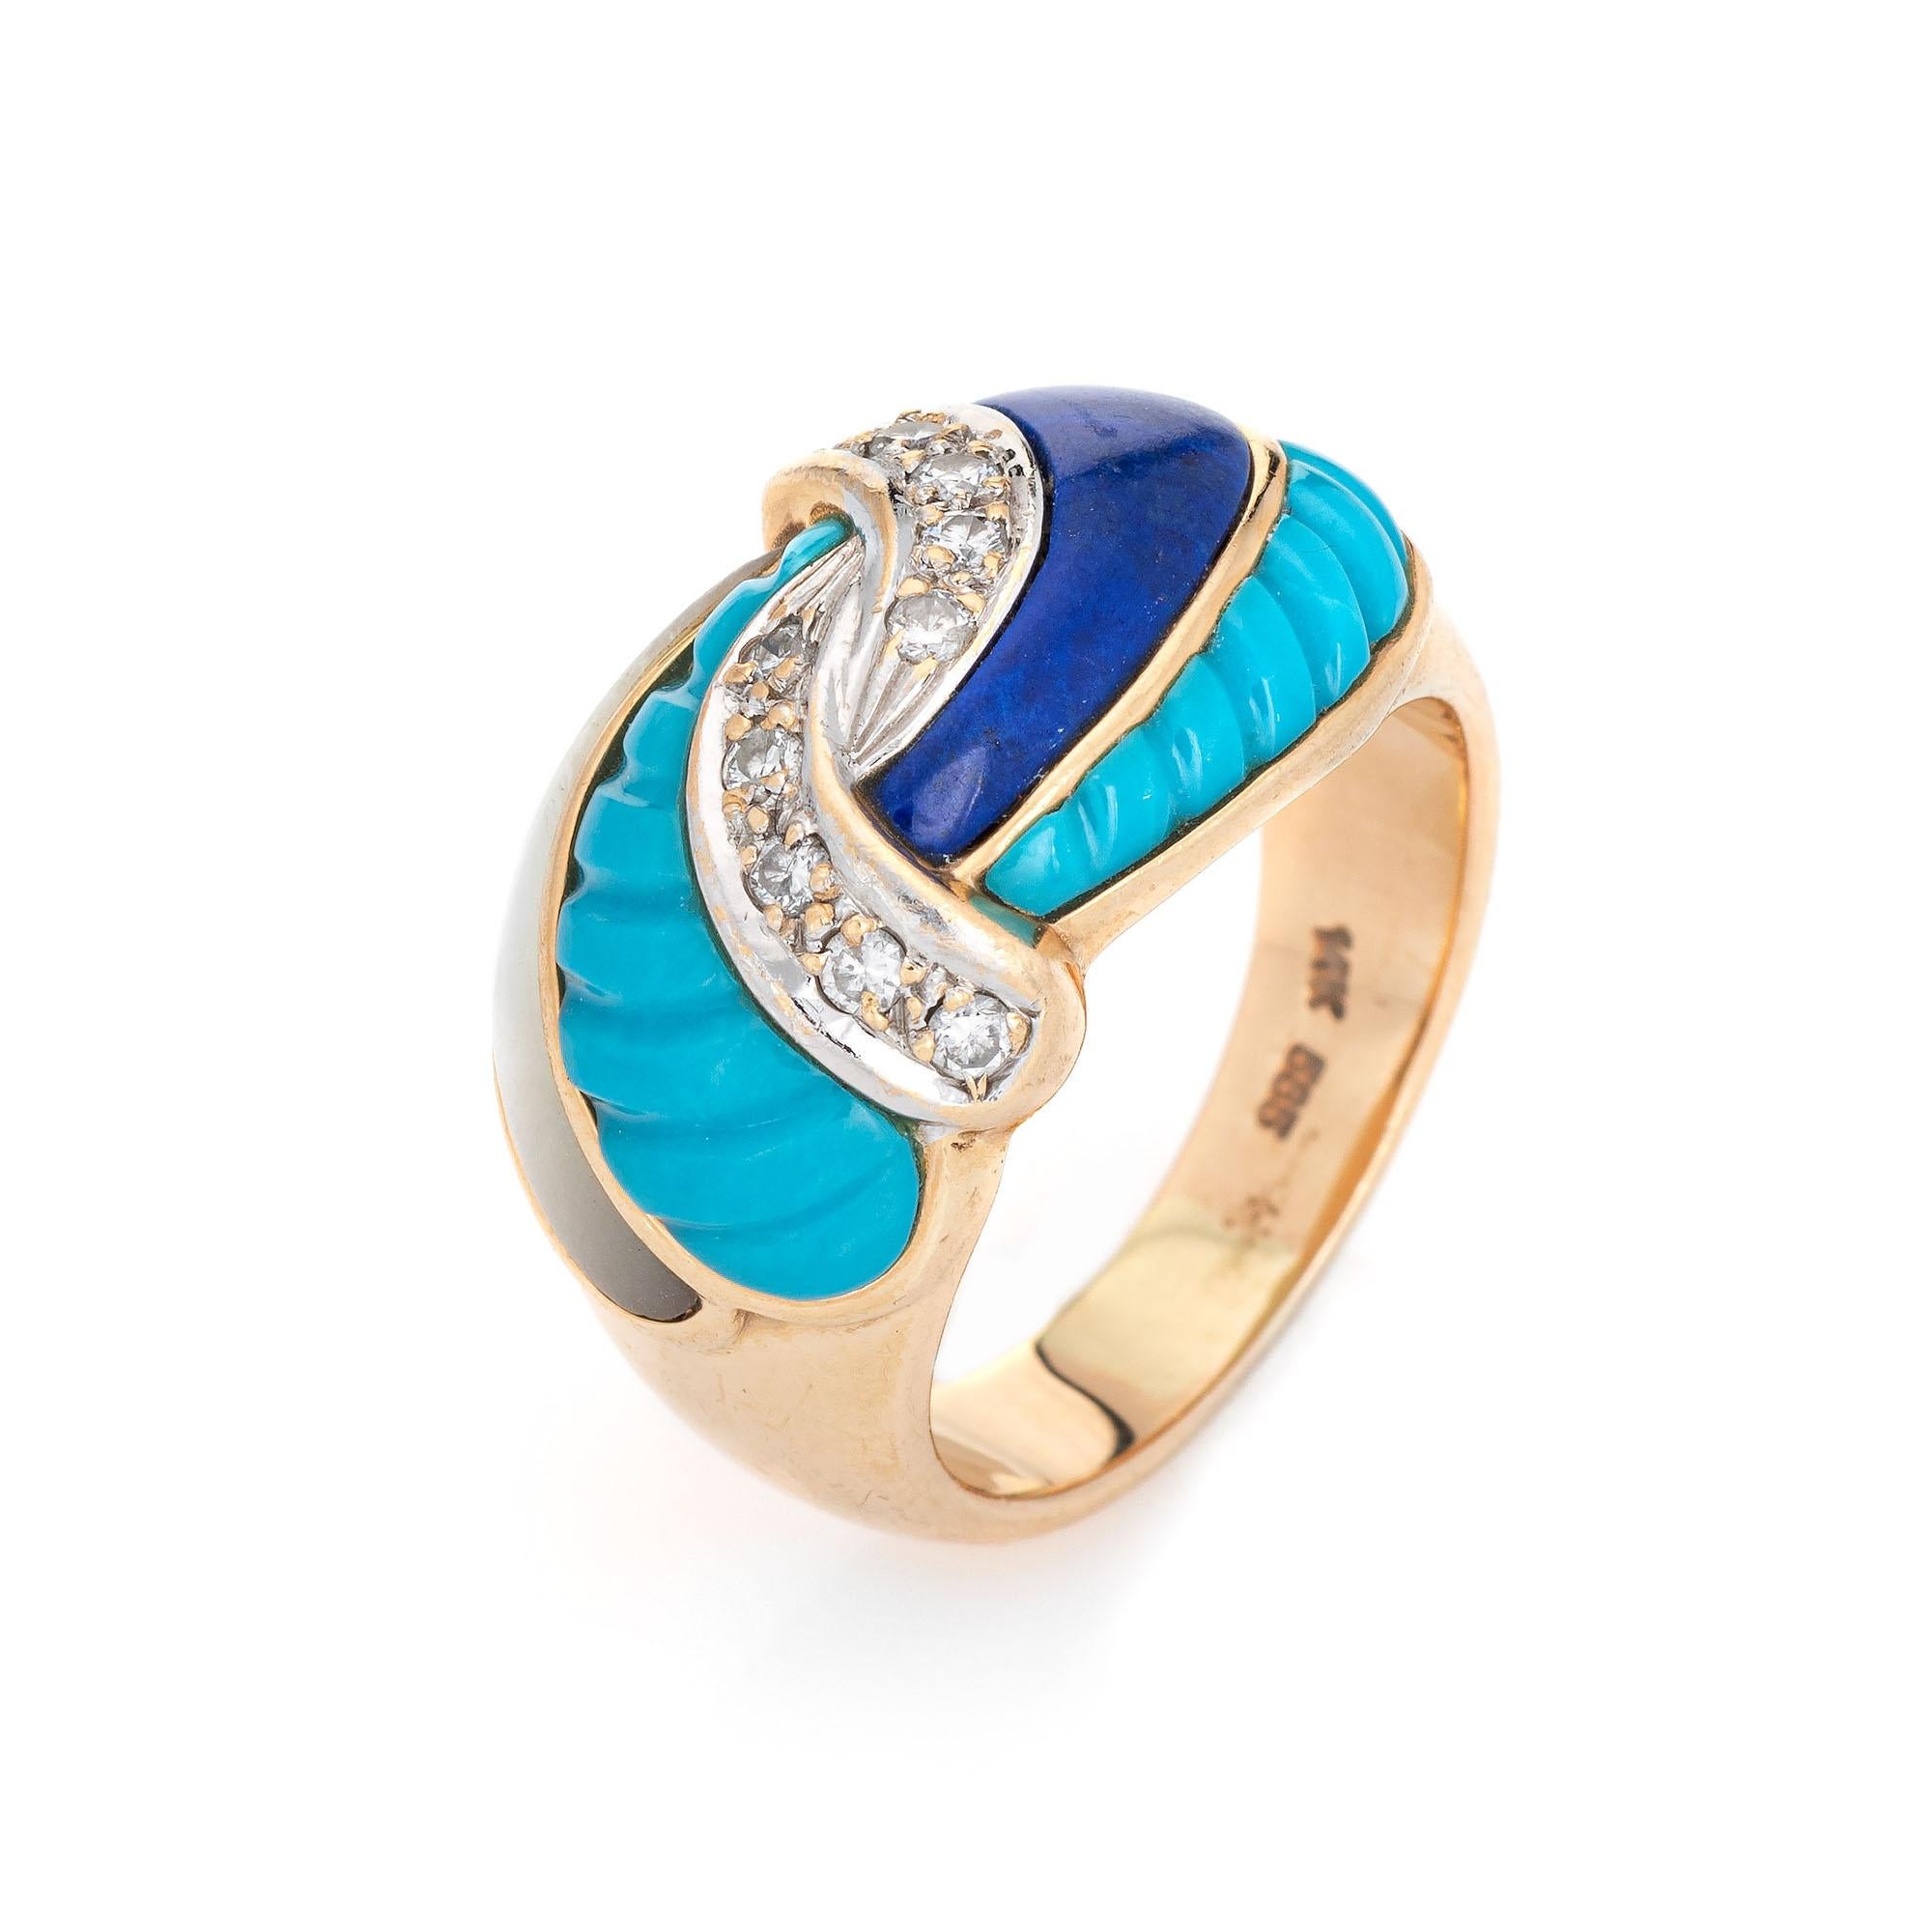 Stylish estate lapis lazuli, turquoise, mother of pearl and diamond ring crafted in 14 karat yellow gold. 

The band is inlaid with lapis lazuli, fluted turquoise and mother of pearl. The diamonds total an estimated 0.10 carats (estimated at I-J